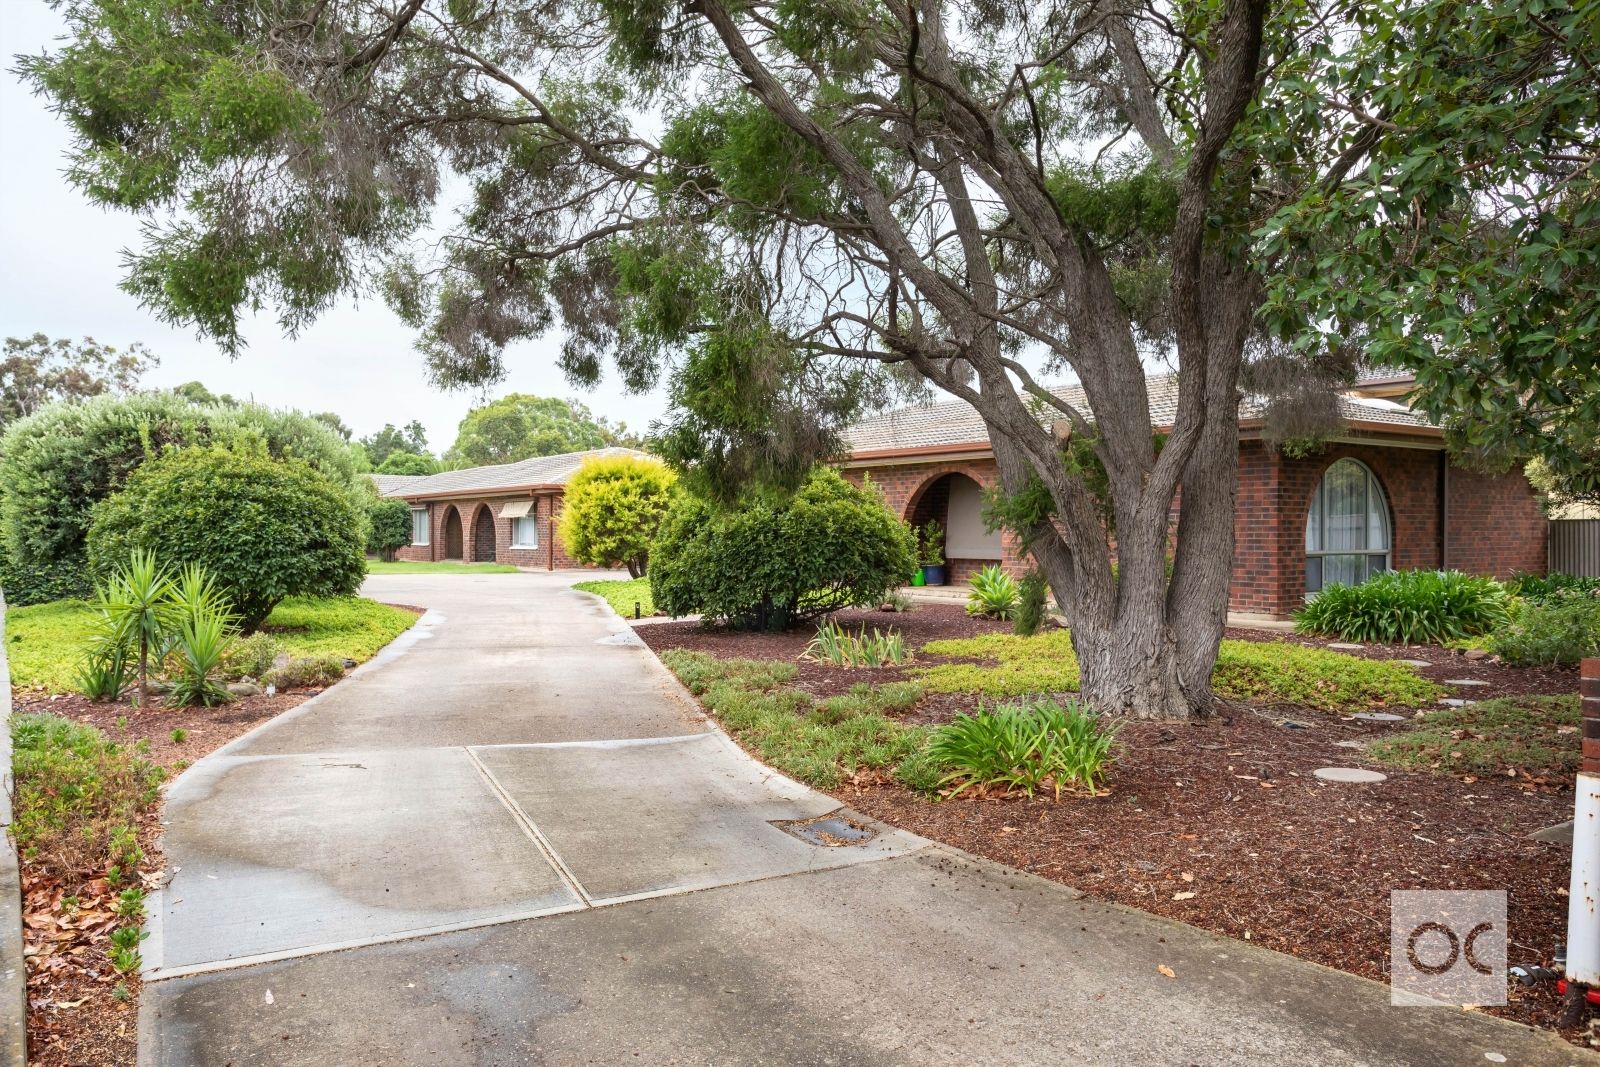 5/66 Forest Avenue, Black Forest SA 5035, Image 0